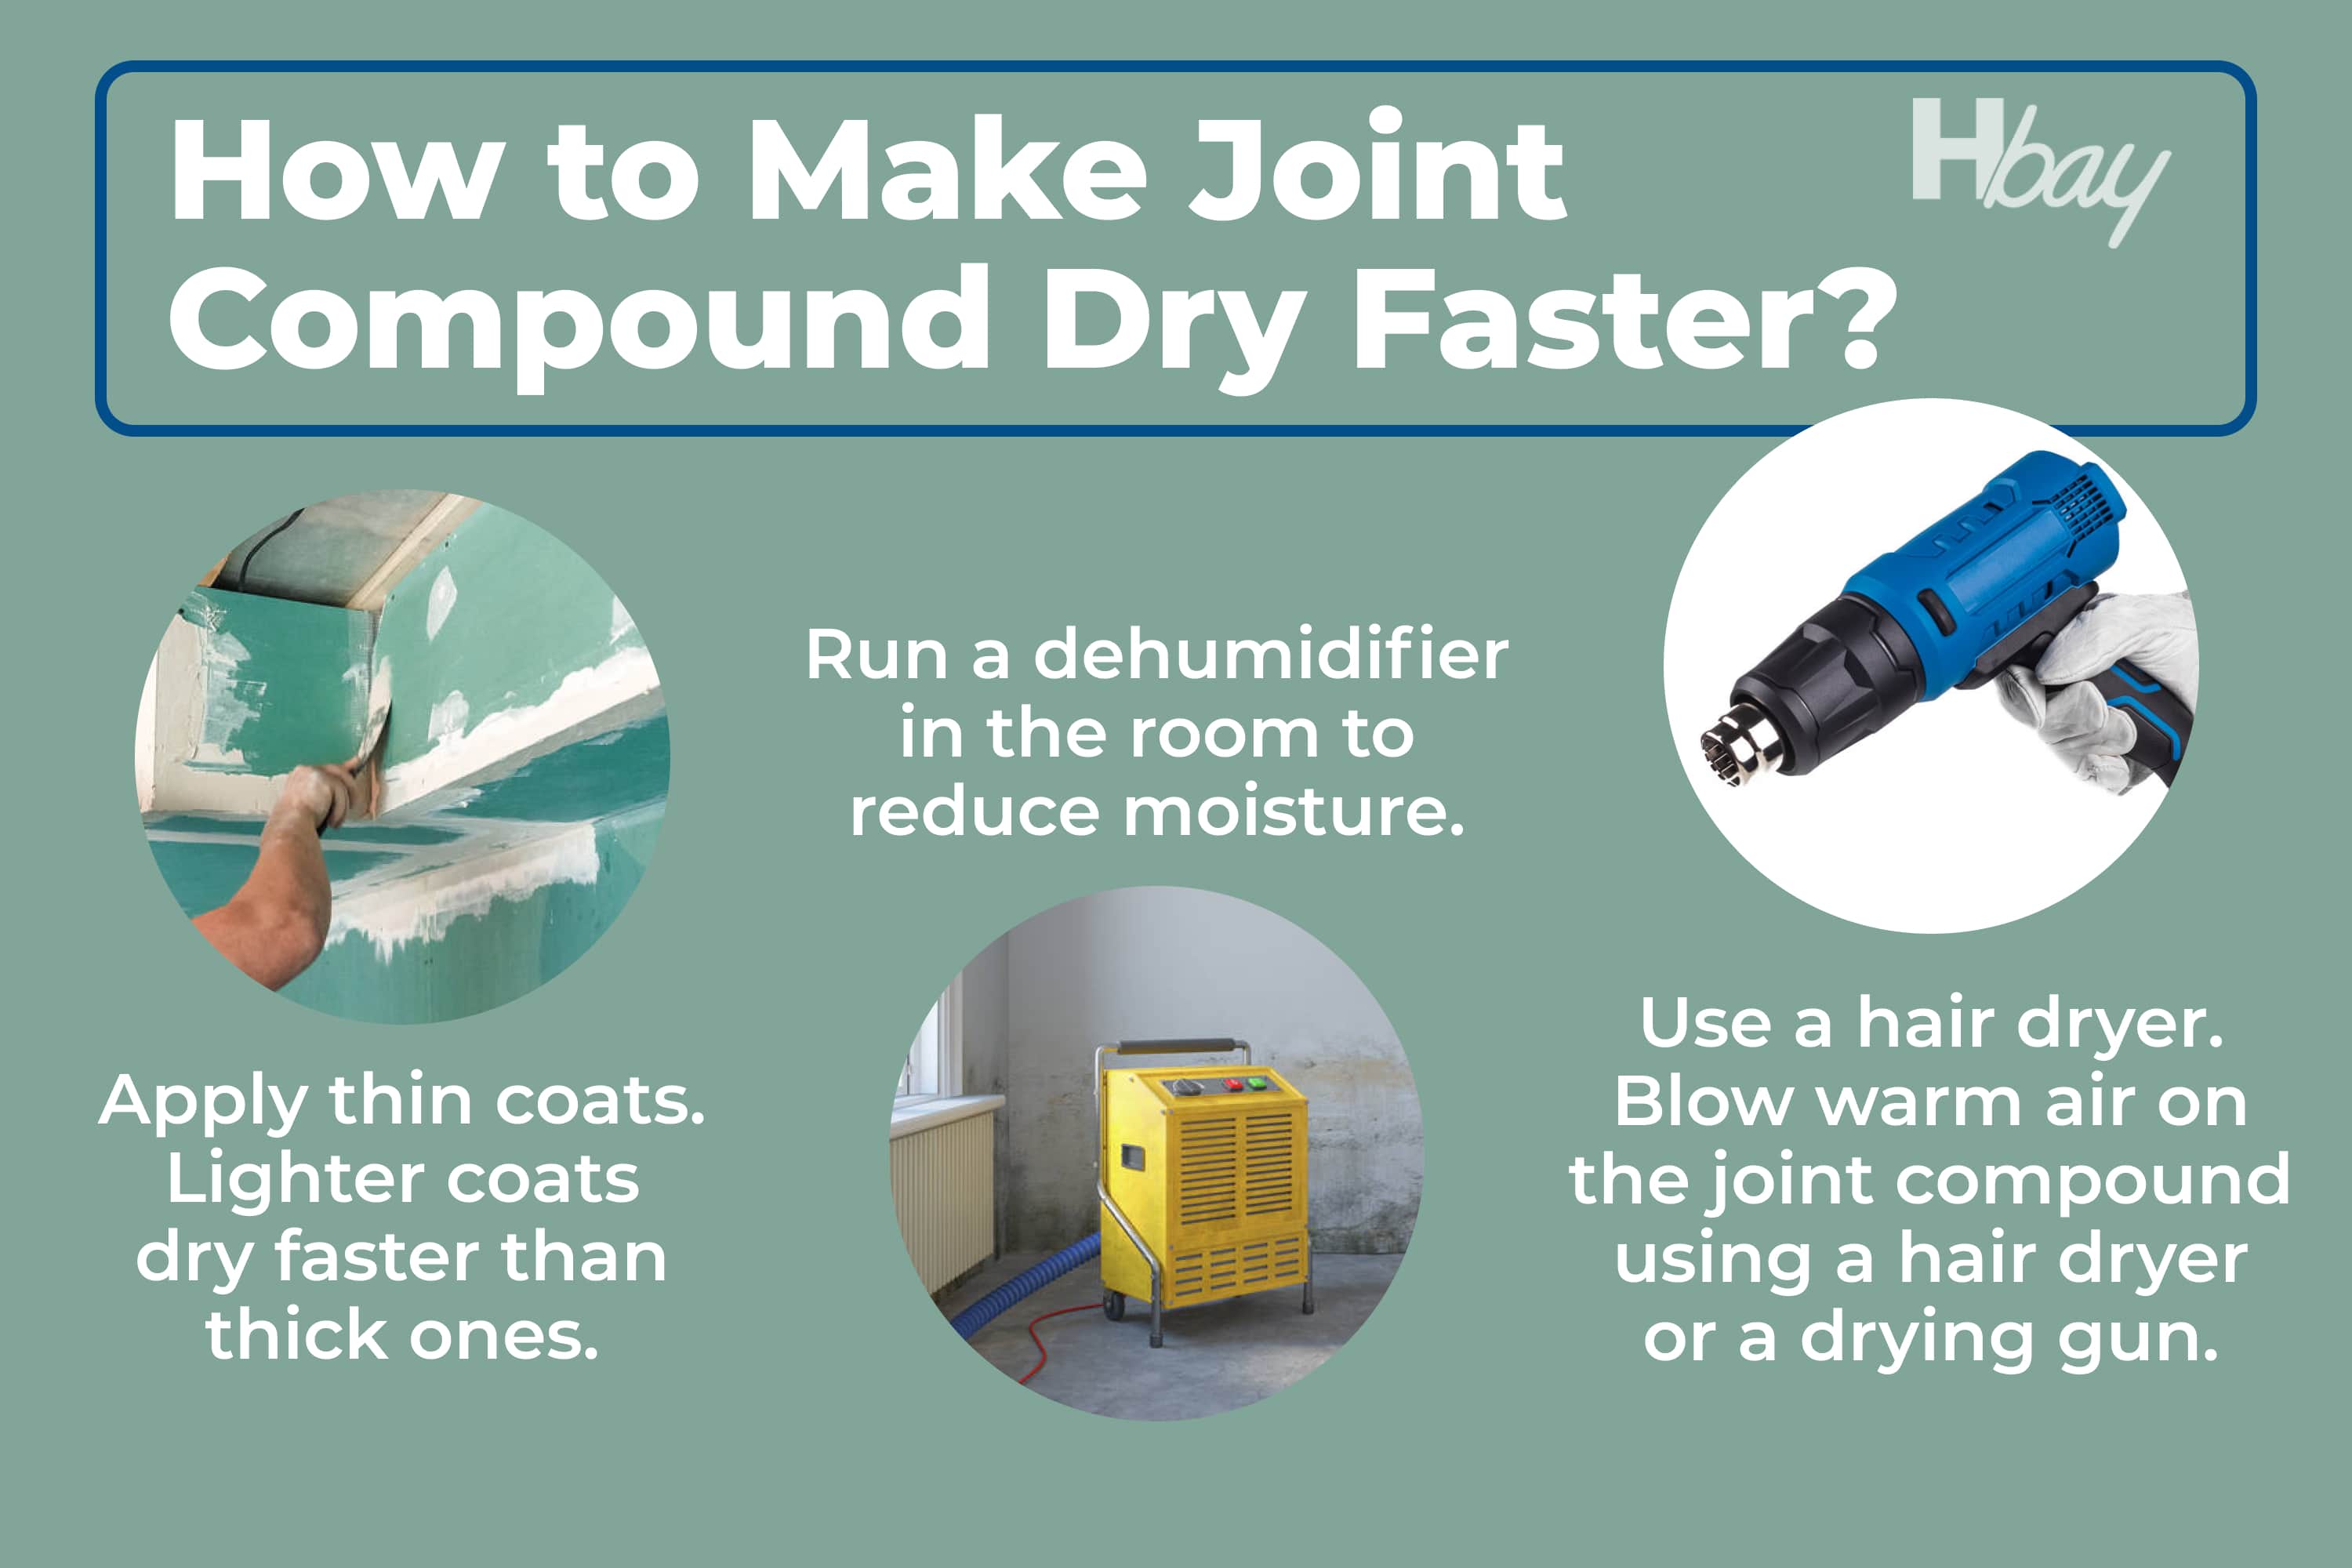 How to Make Joint Compound Dry Faster